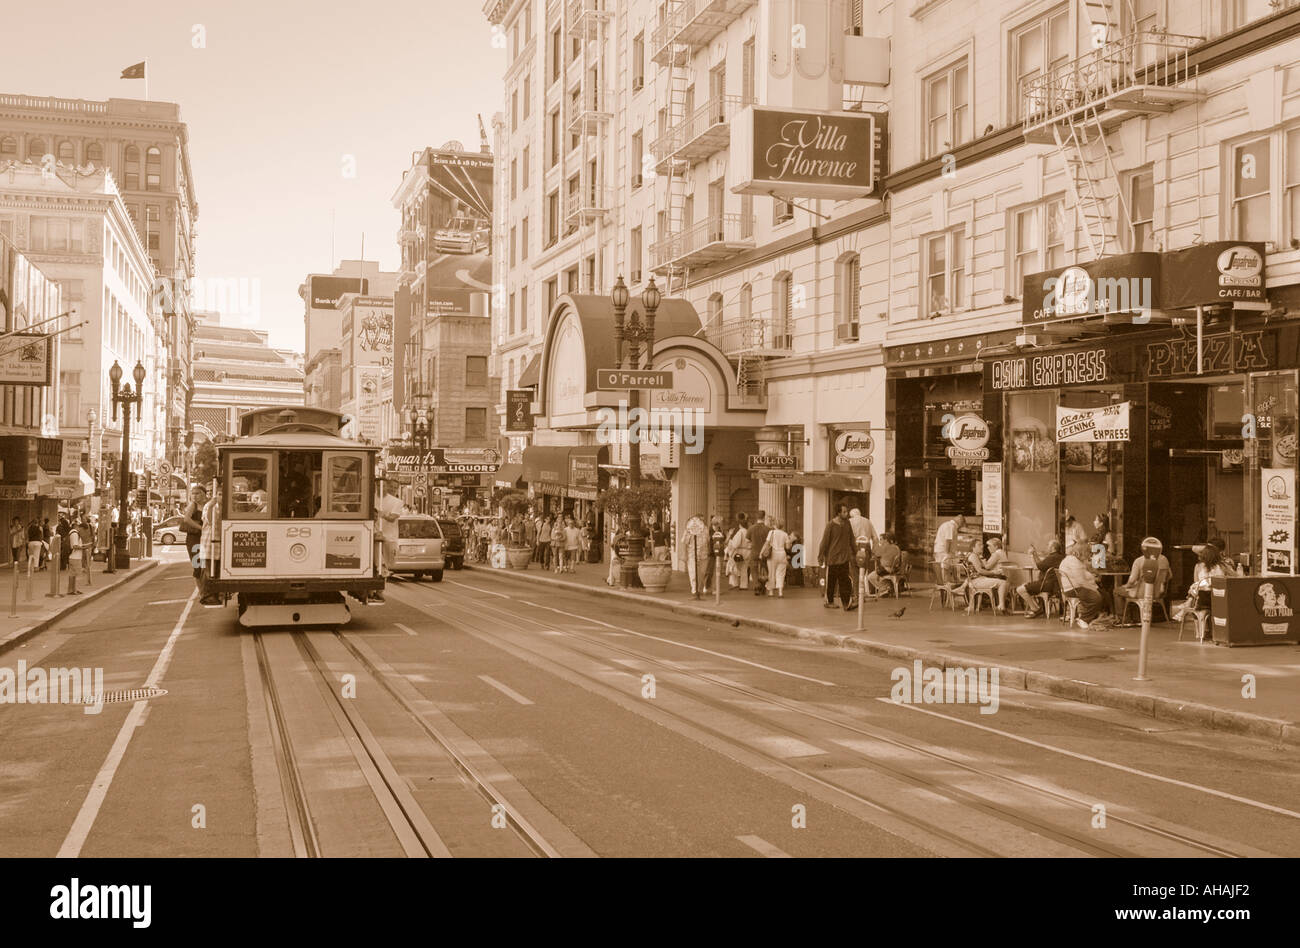 A cable car makes it s way through San Francisco in this old fashioned sepia toned image Stock Photo